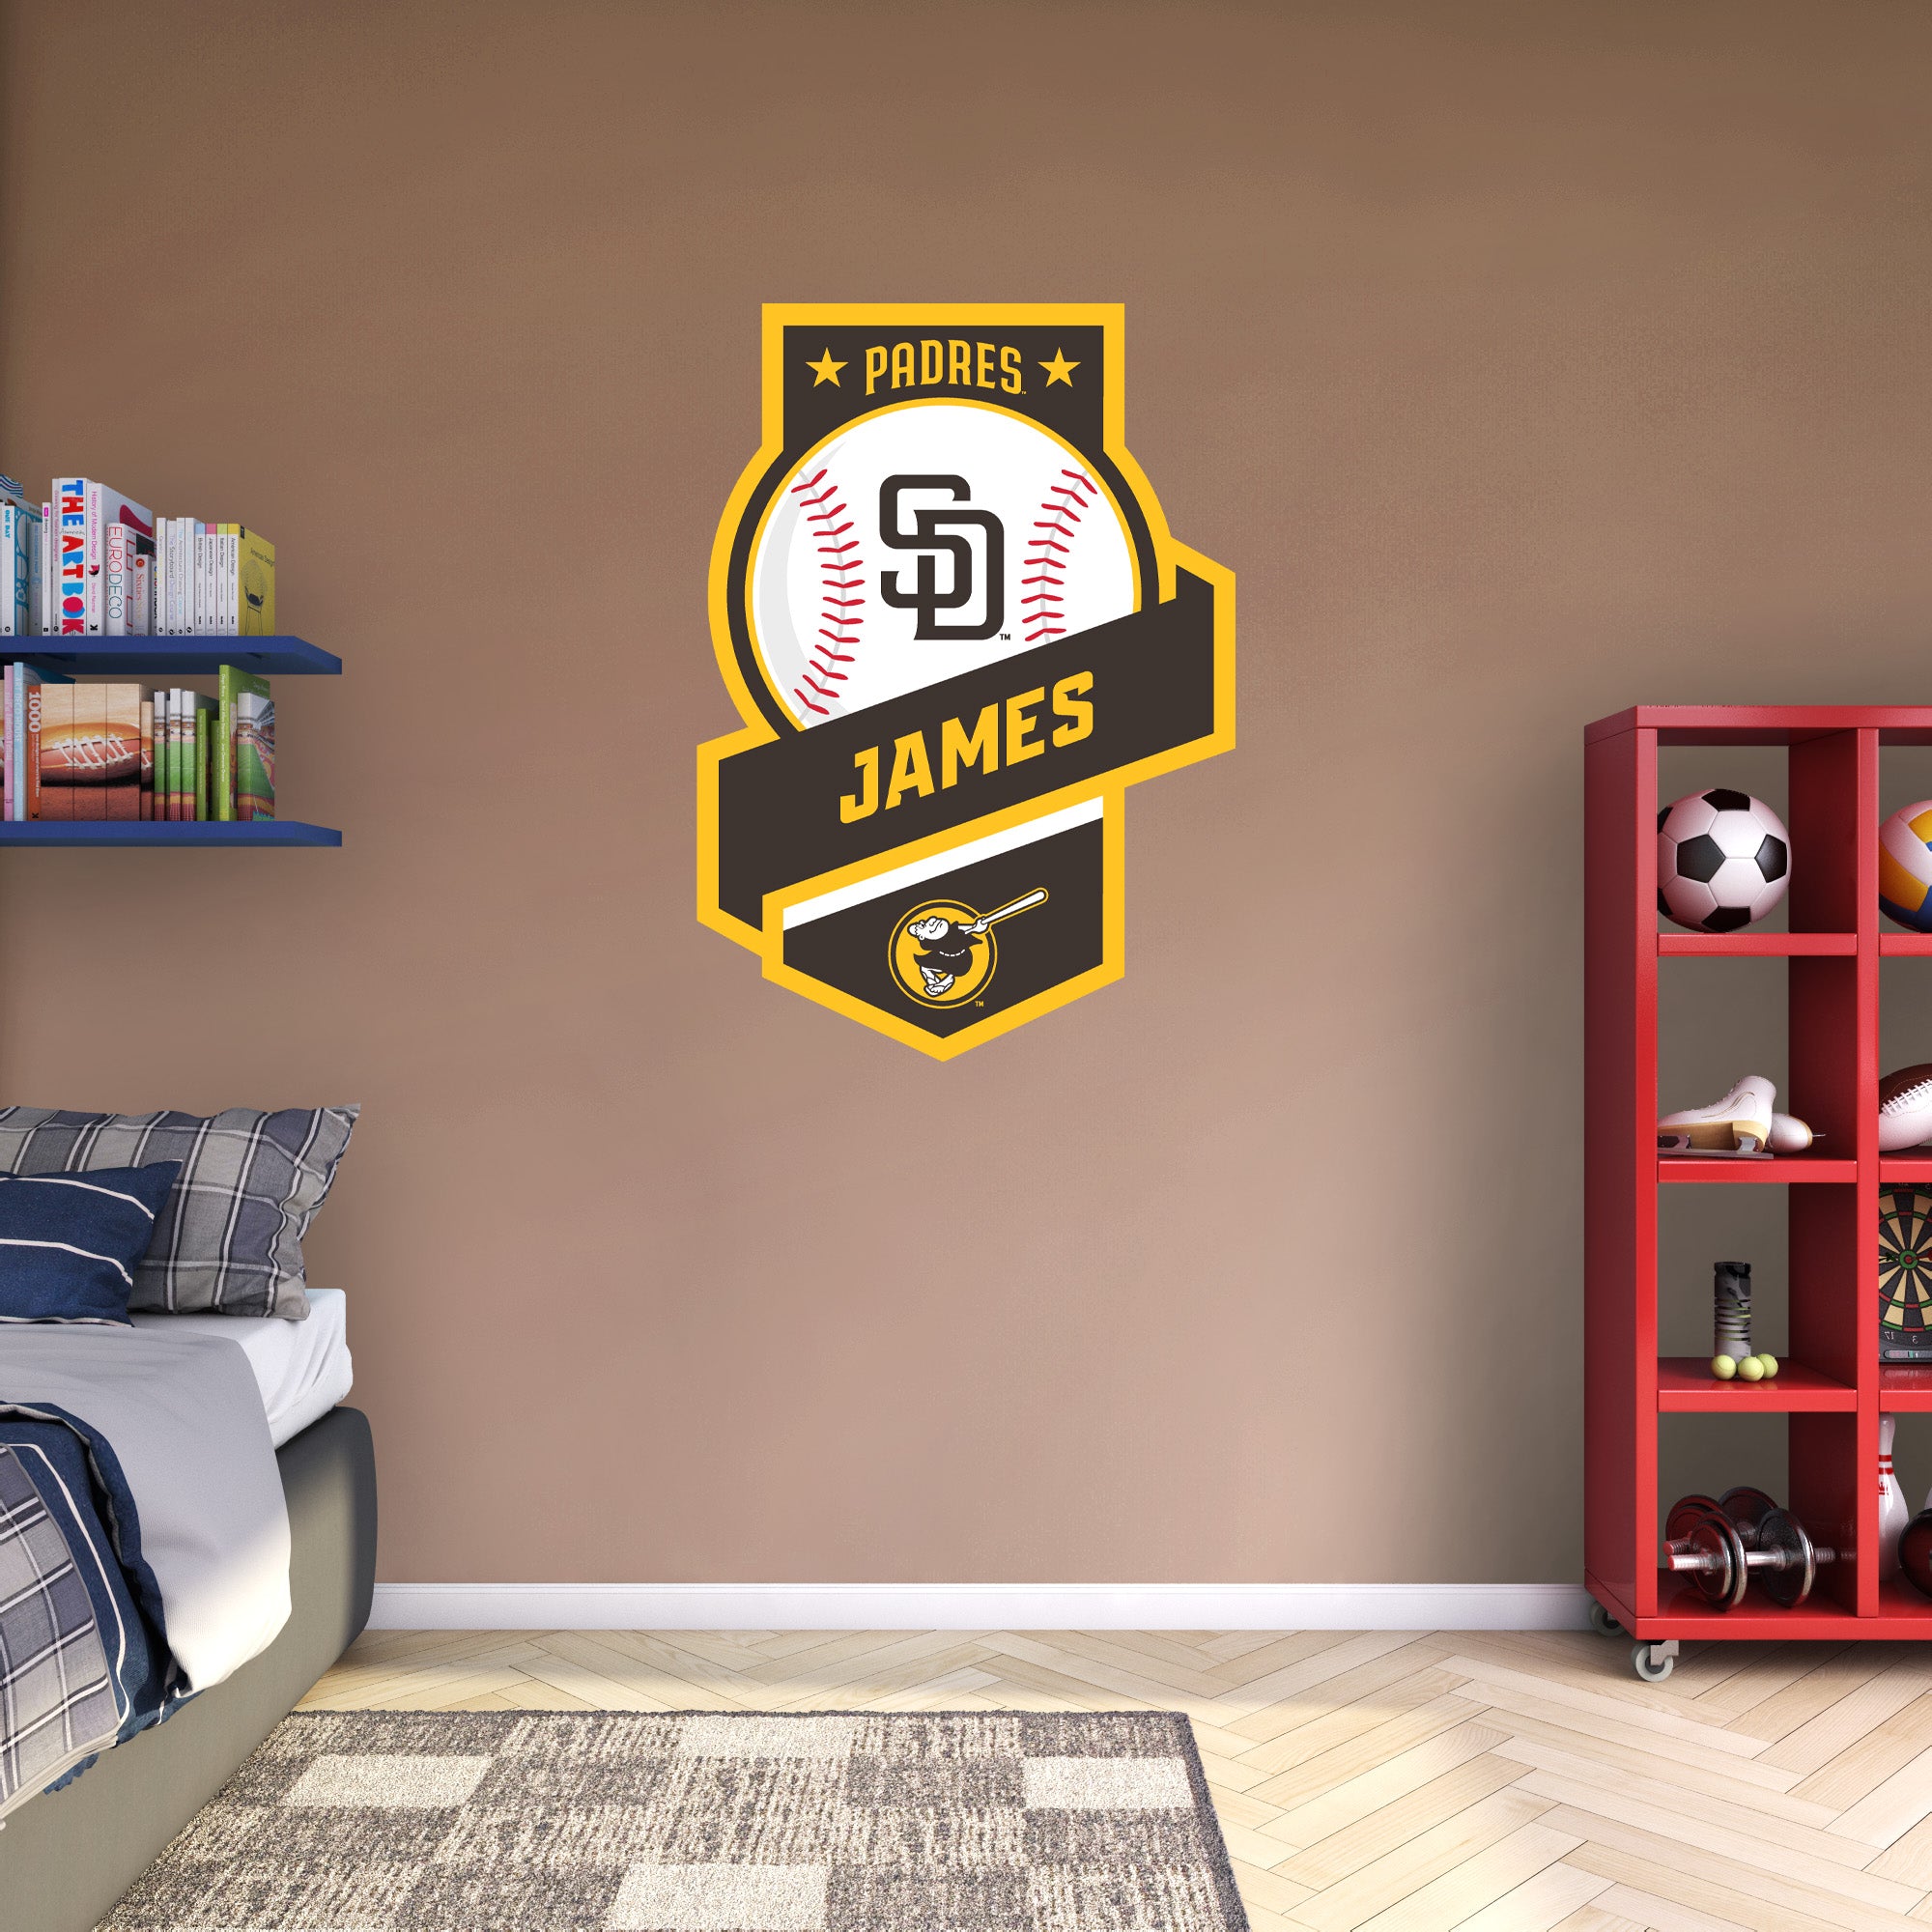 San Diego Padres: 2023 Friar City Connect Logo Minis - Officially Lice –  Fathead